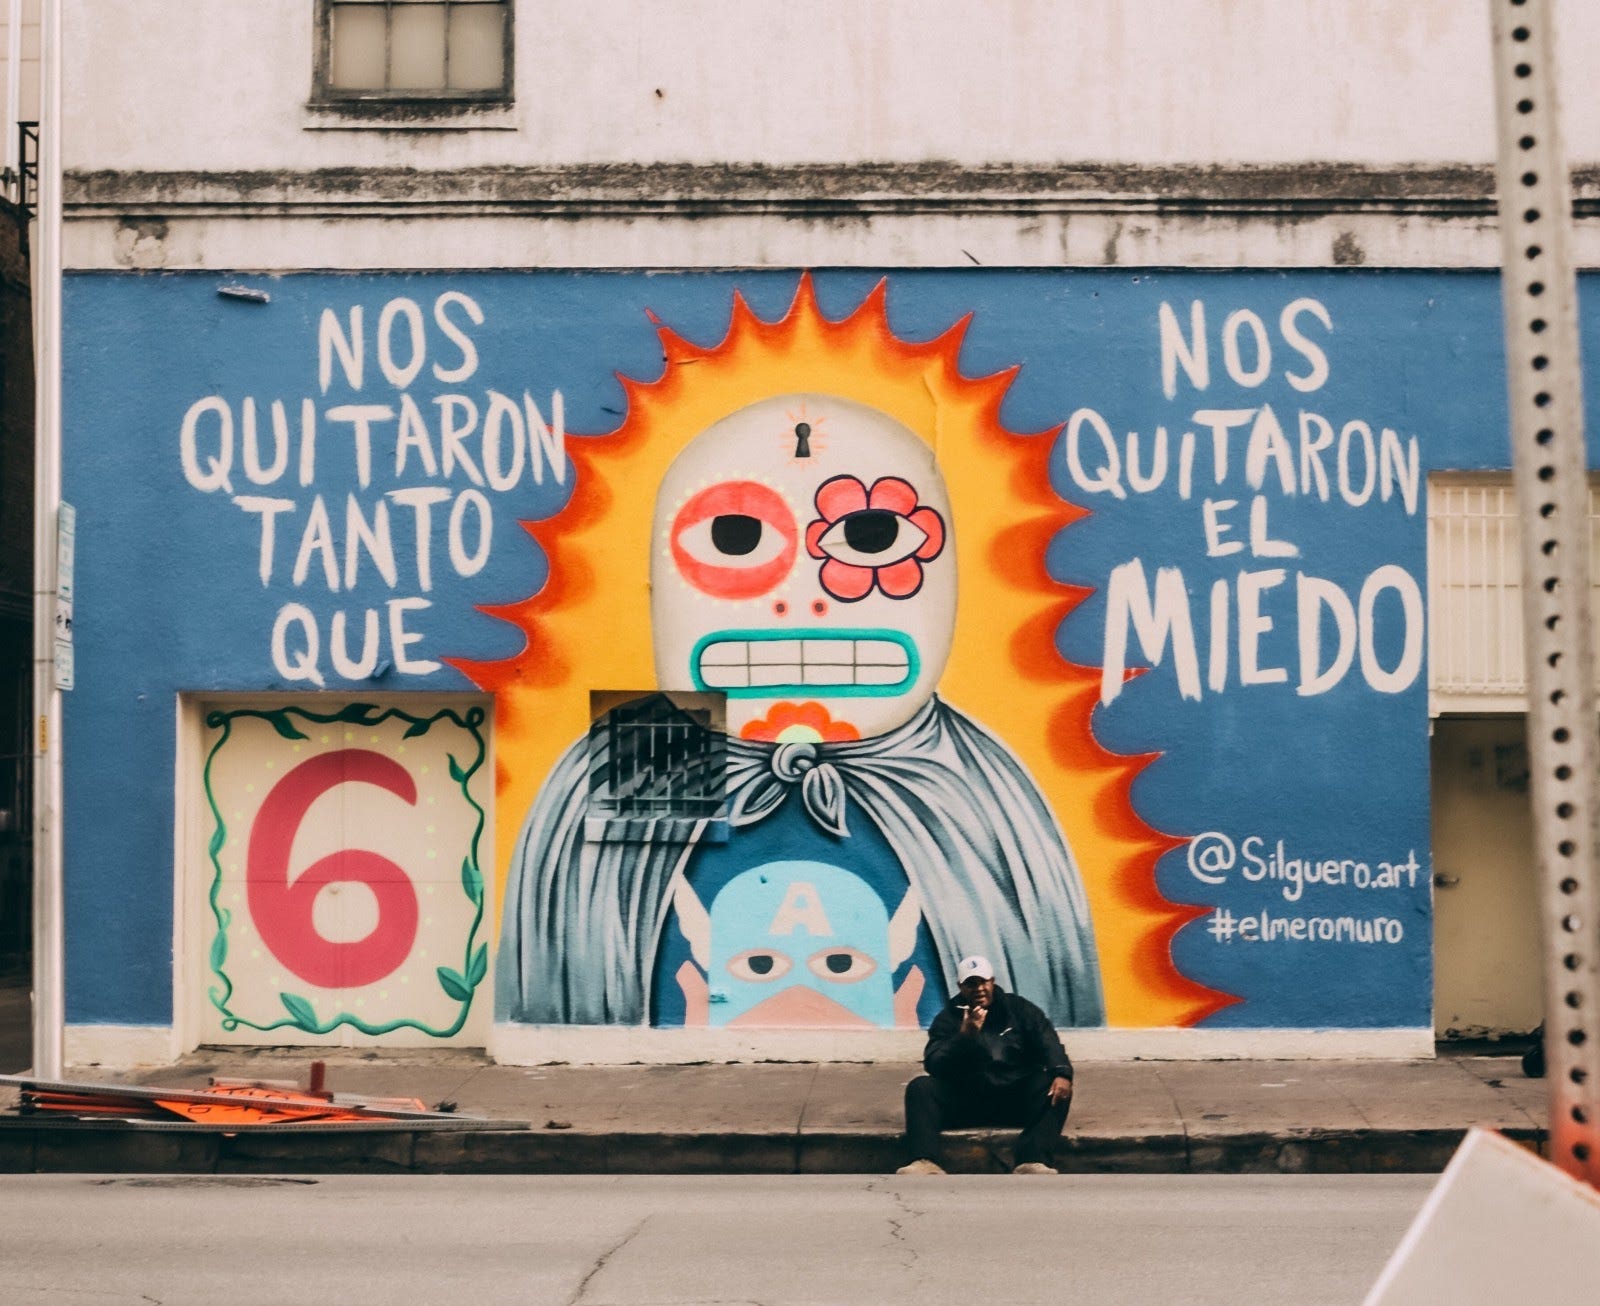 A photo of a mural on the side of a building. The mural shows a cartoon figure with what looks like fire around it and the words “nos quitaron tanto que nos quitaron el miedo” written on either side.